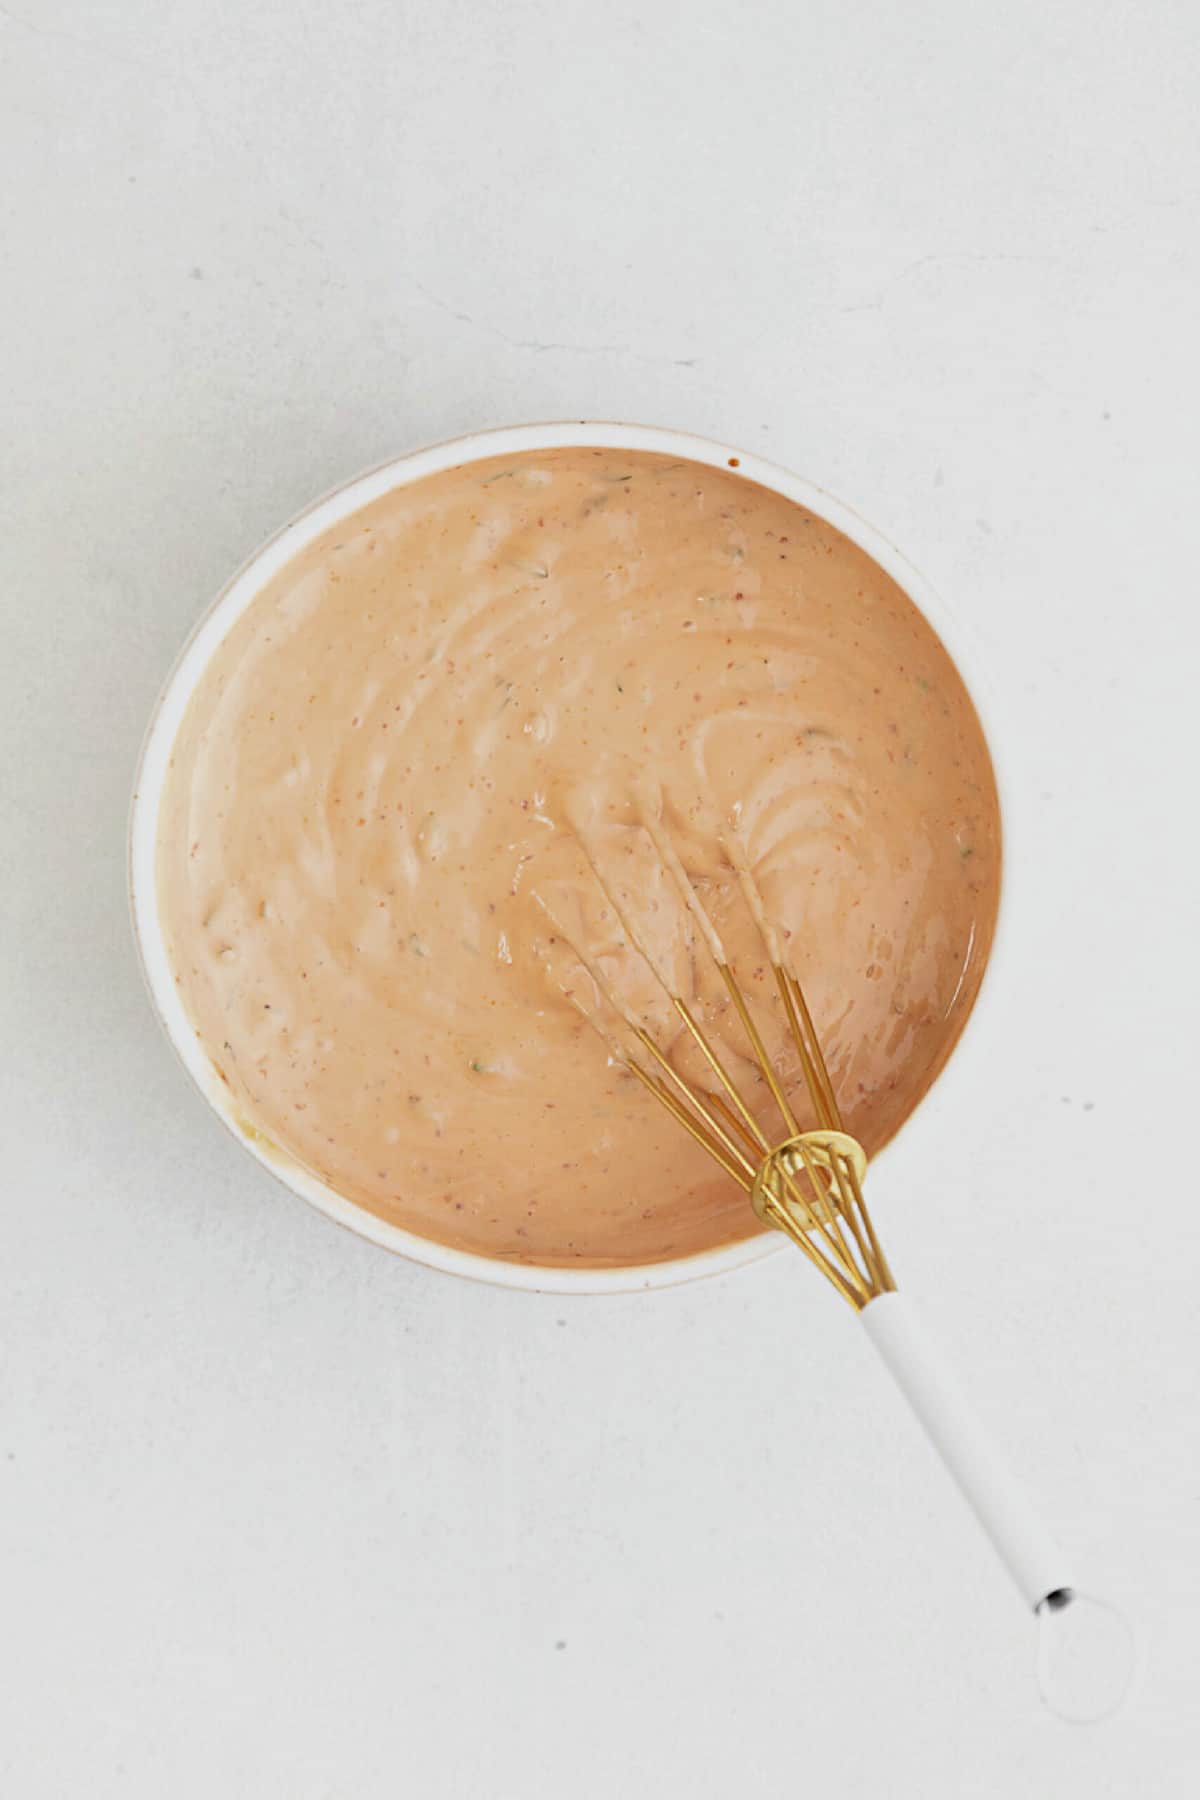 freshly made Russian dressing in a white ceramic bowl with a whisk